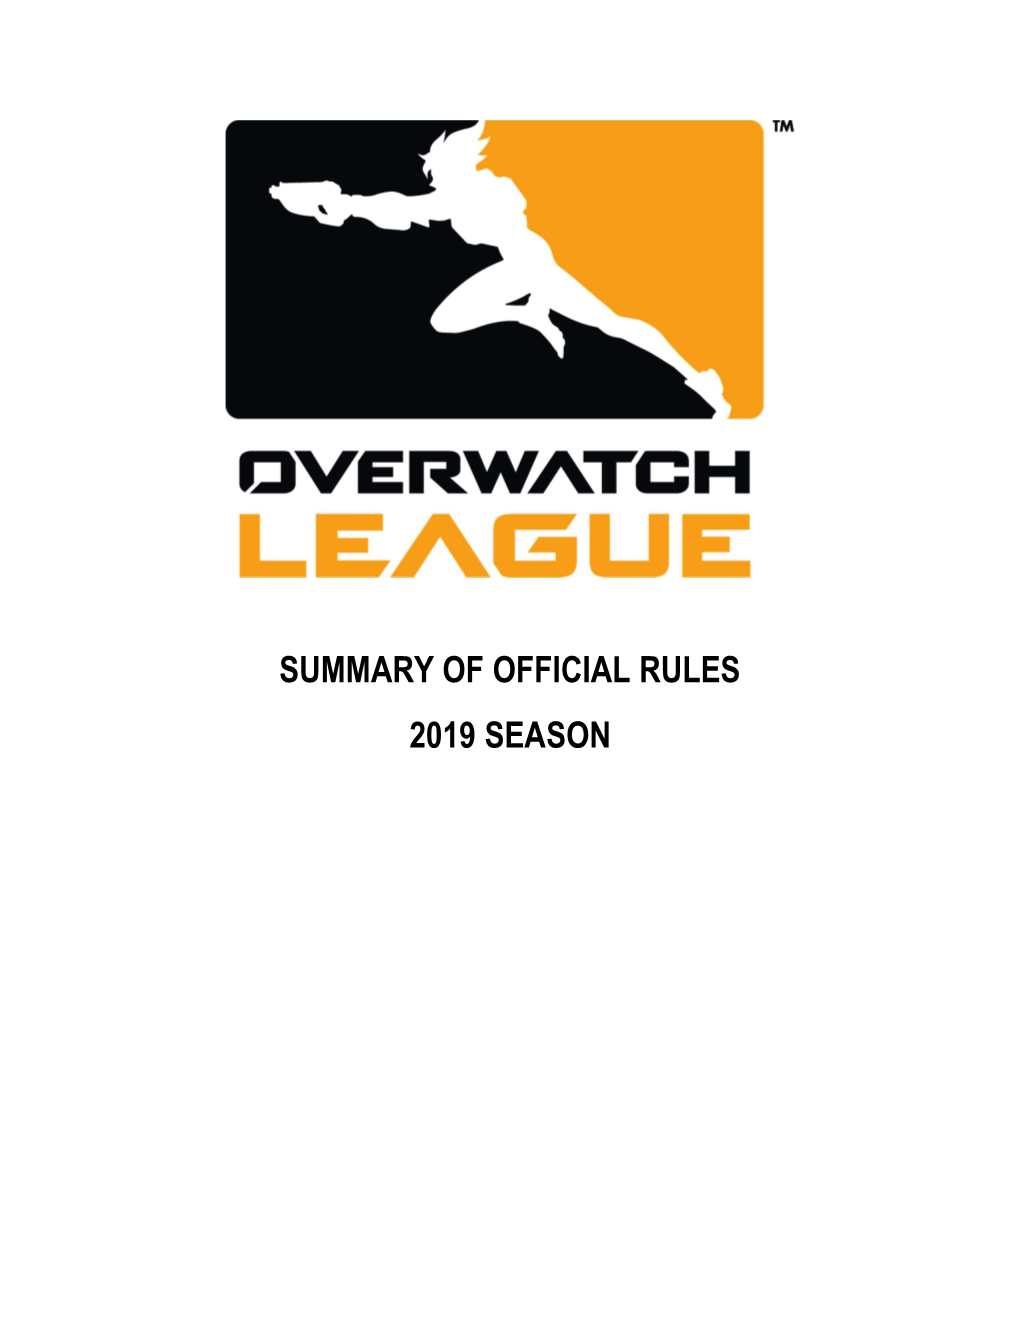 Summary of Official Rules 2019 Season